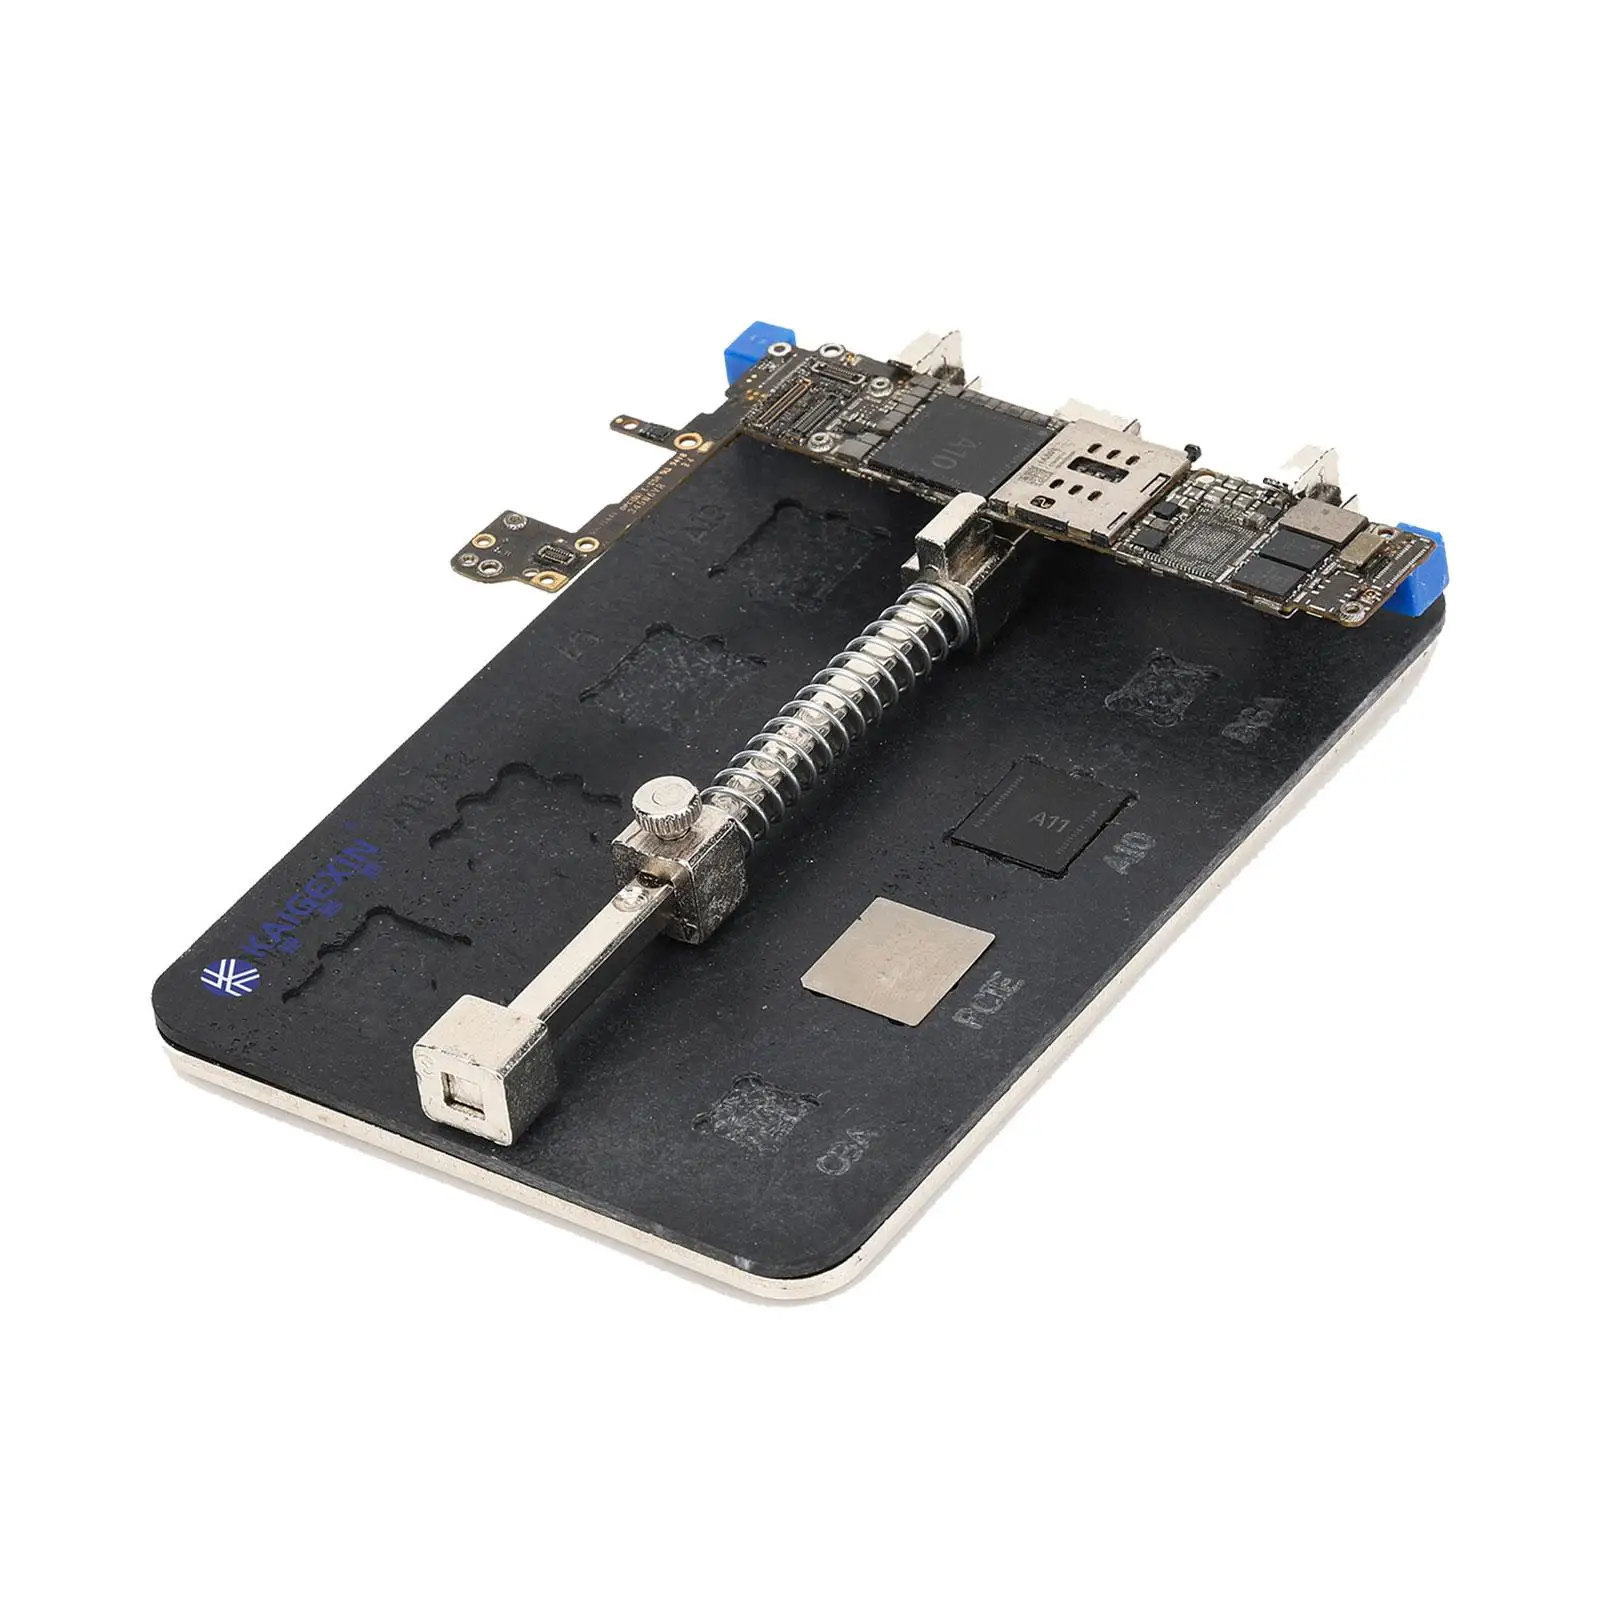 Phone Circuit Board Clamp Holder Replaces for Grooves Soldering